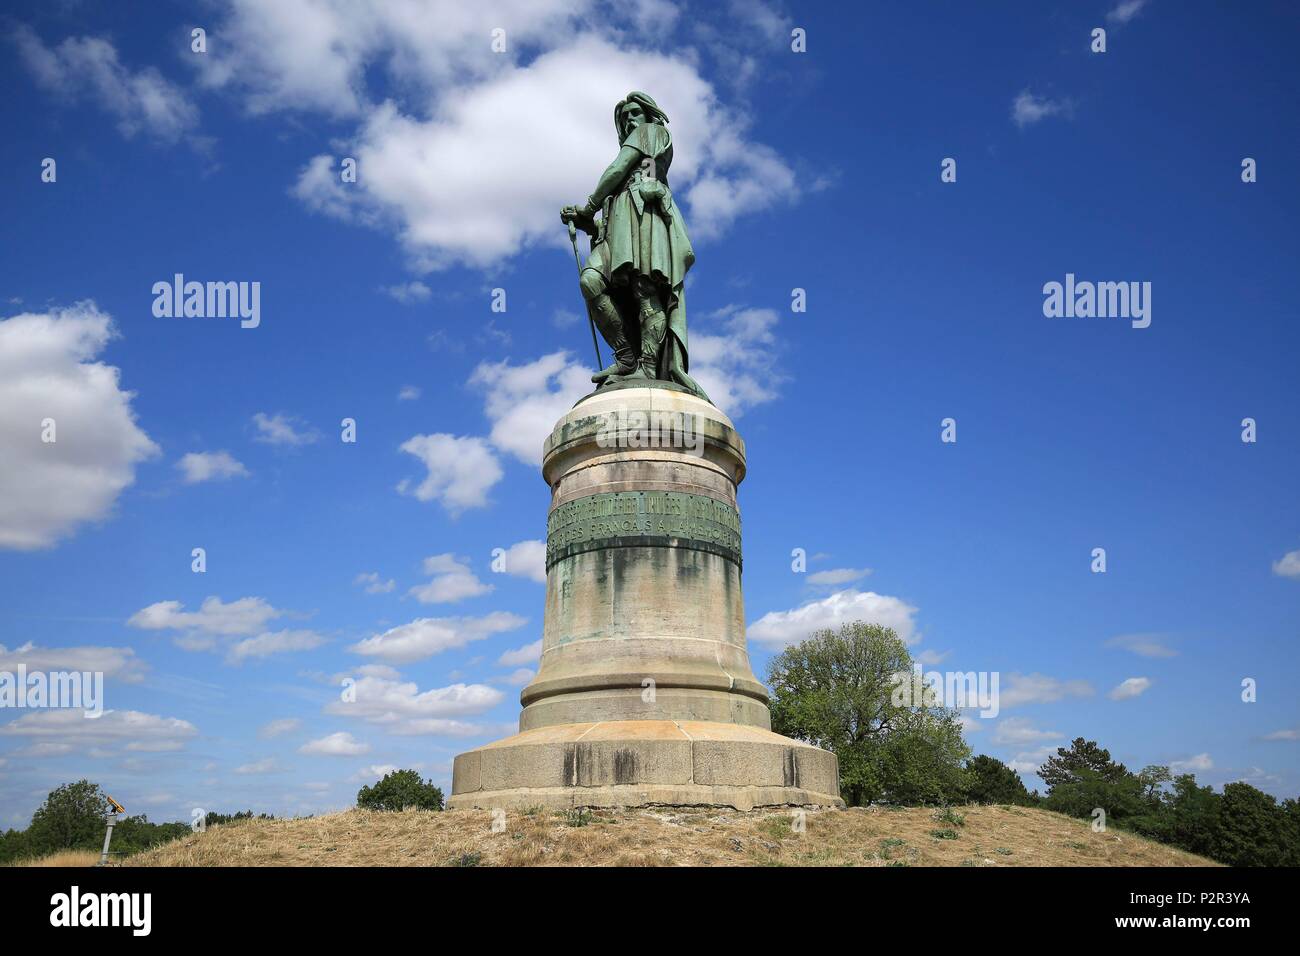 France, Cote d'Or, Alise Sainte Reine, the statue in memory of Vercingetorix by sculptor Aimé Millet at the top of Mont Auxois Stock Photo